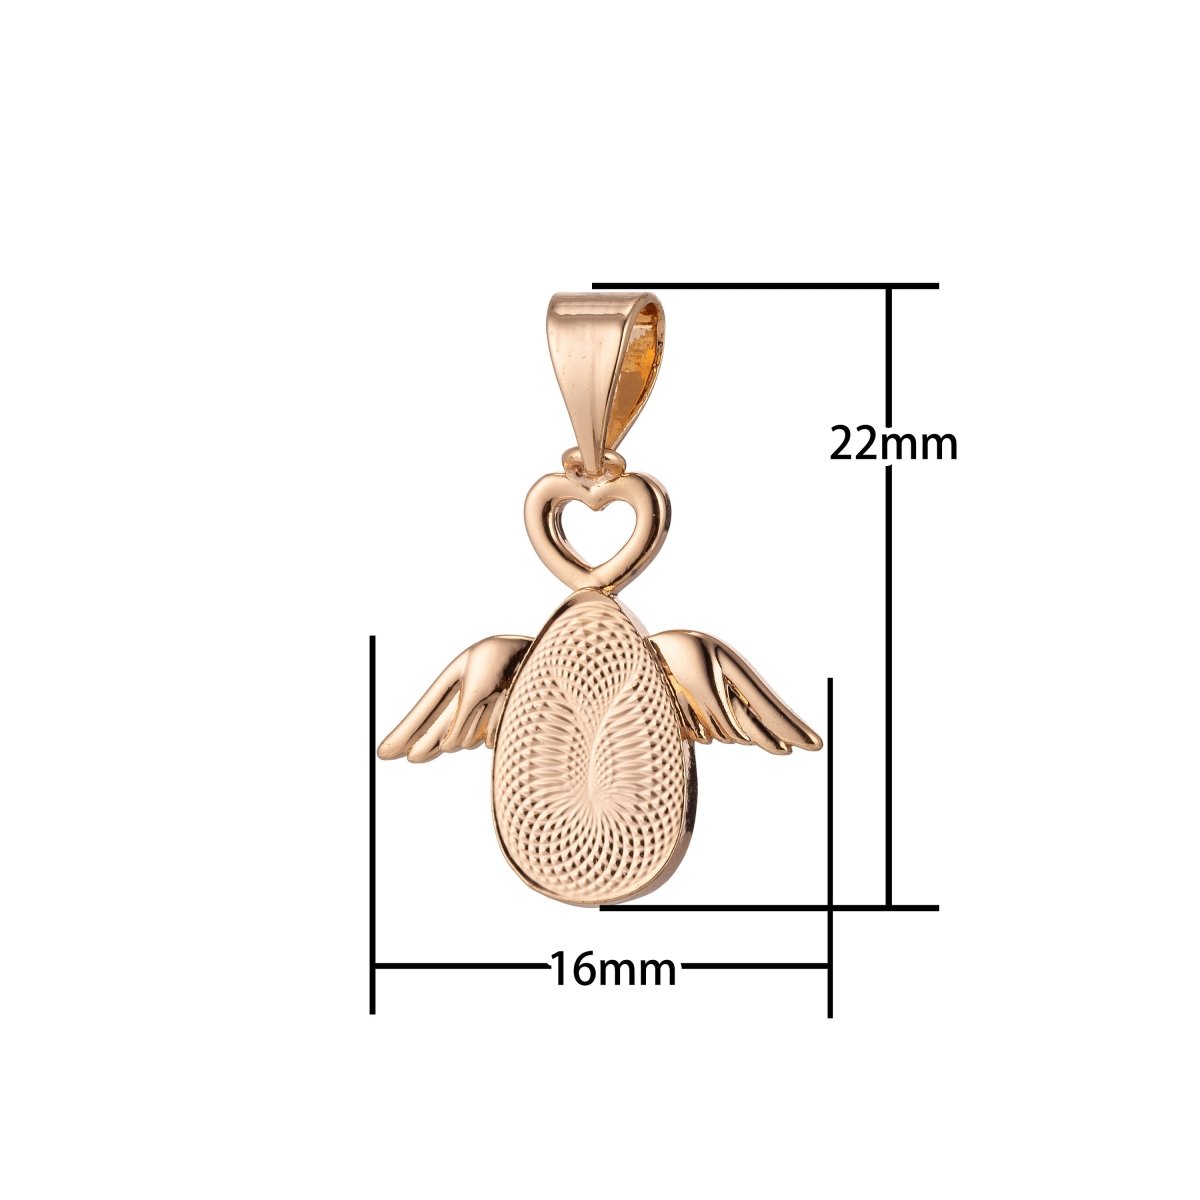 Rose Gold egg Charm Angel Wings Charm, 18K Gold Filled Pendant Dainty Egg with Wings Necklace Charm for Jewelry Making H-875 - DLUXCA